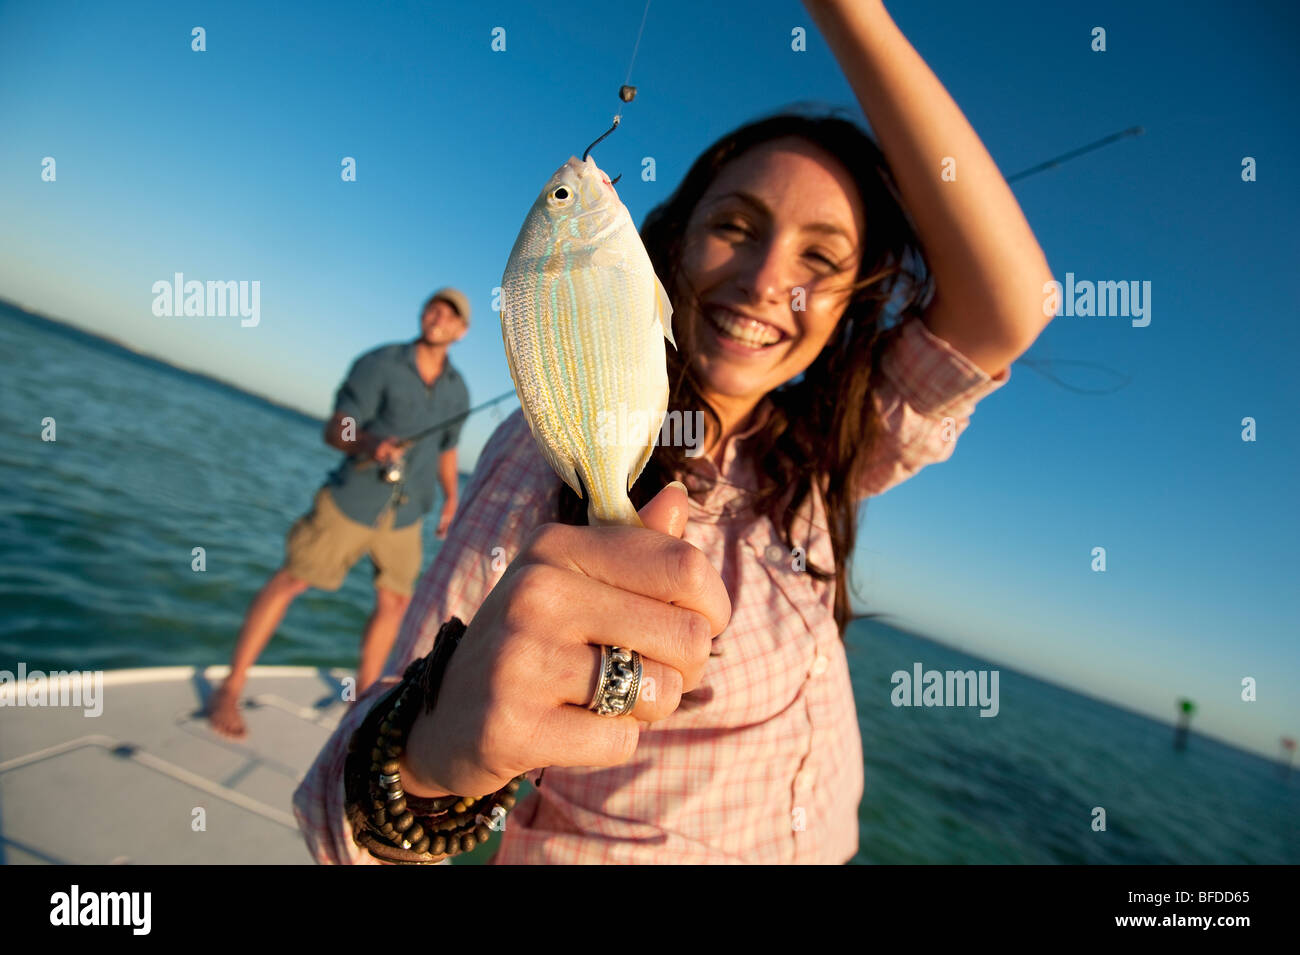 A woman smiles and holds up a small fish in Florida. Stock Photo